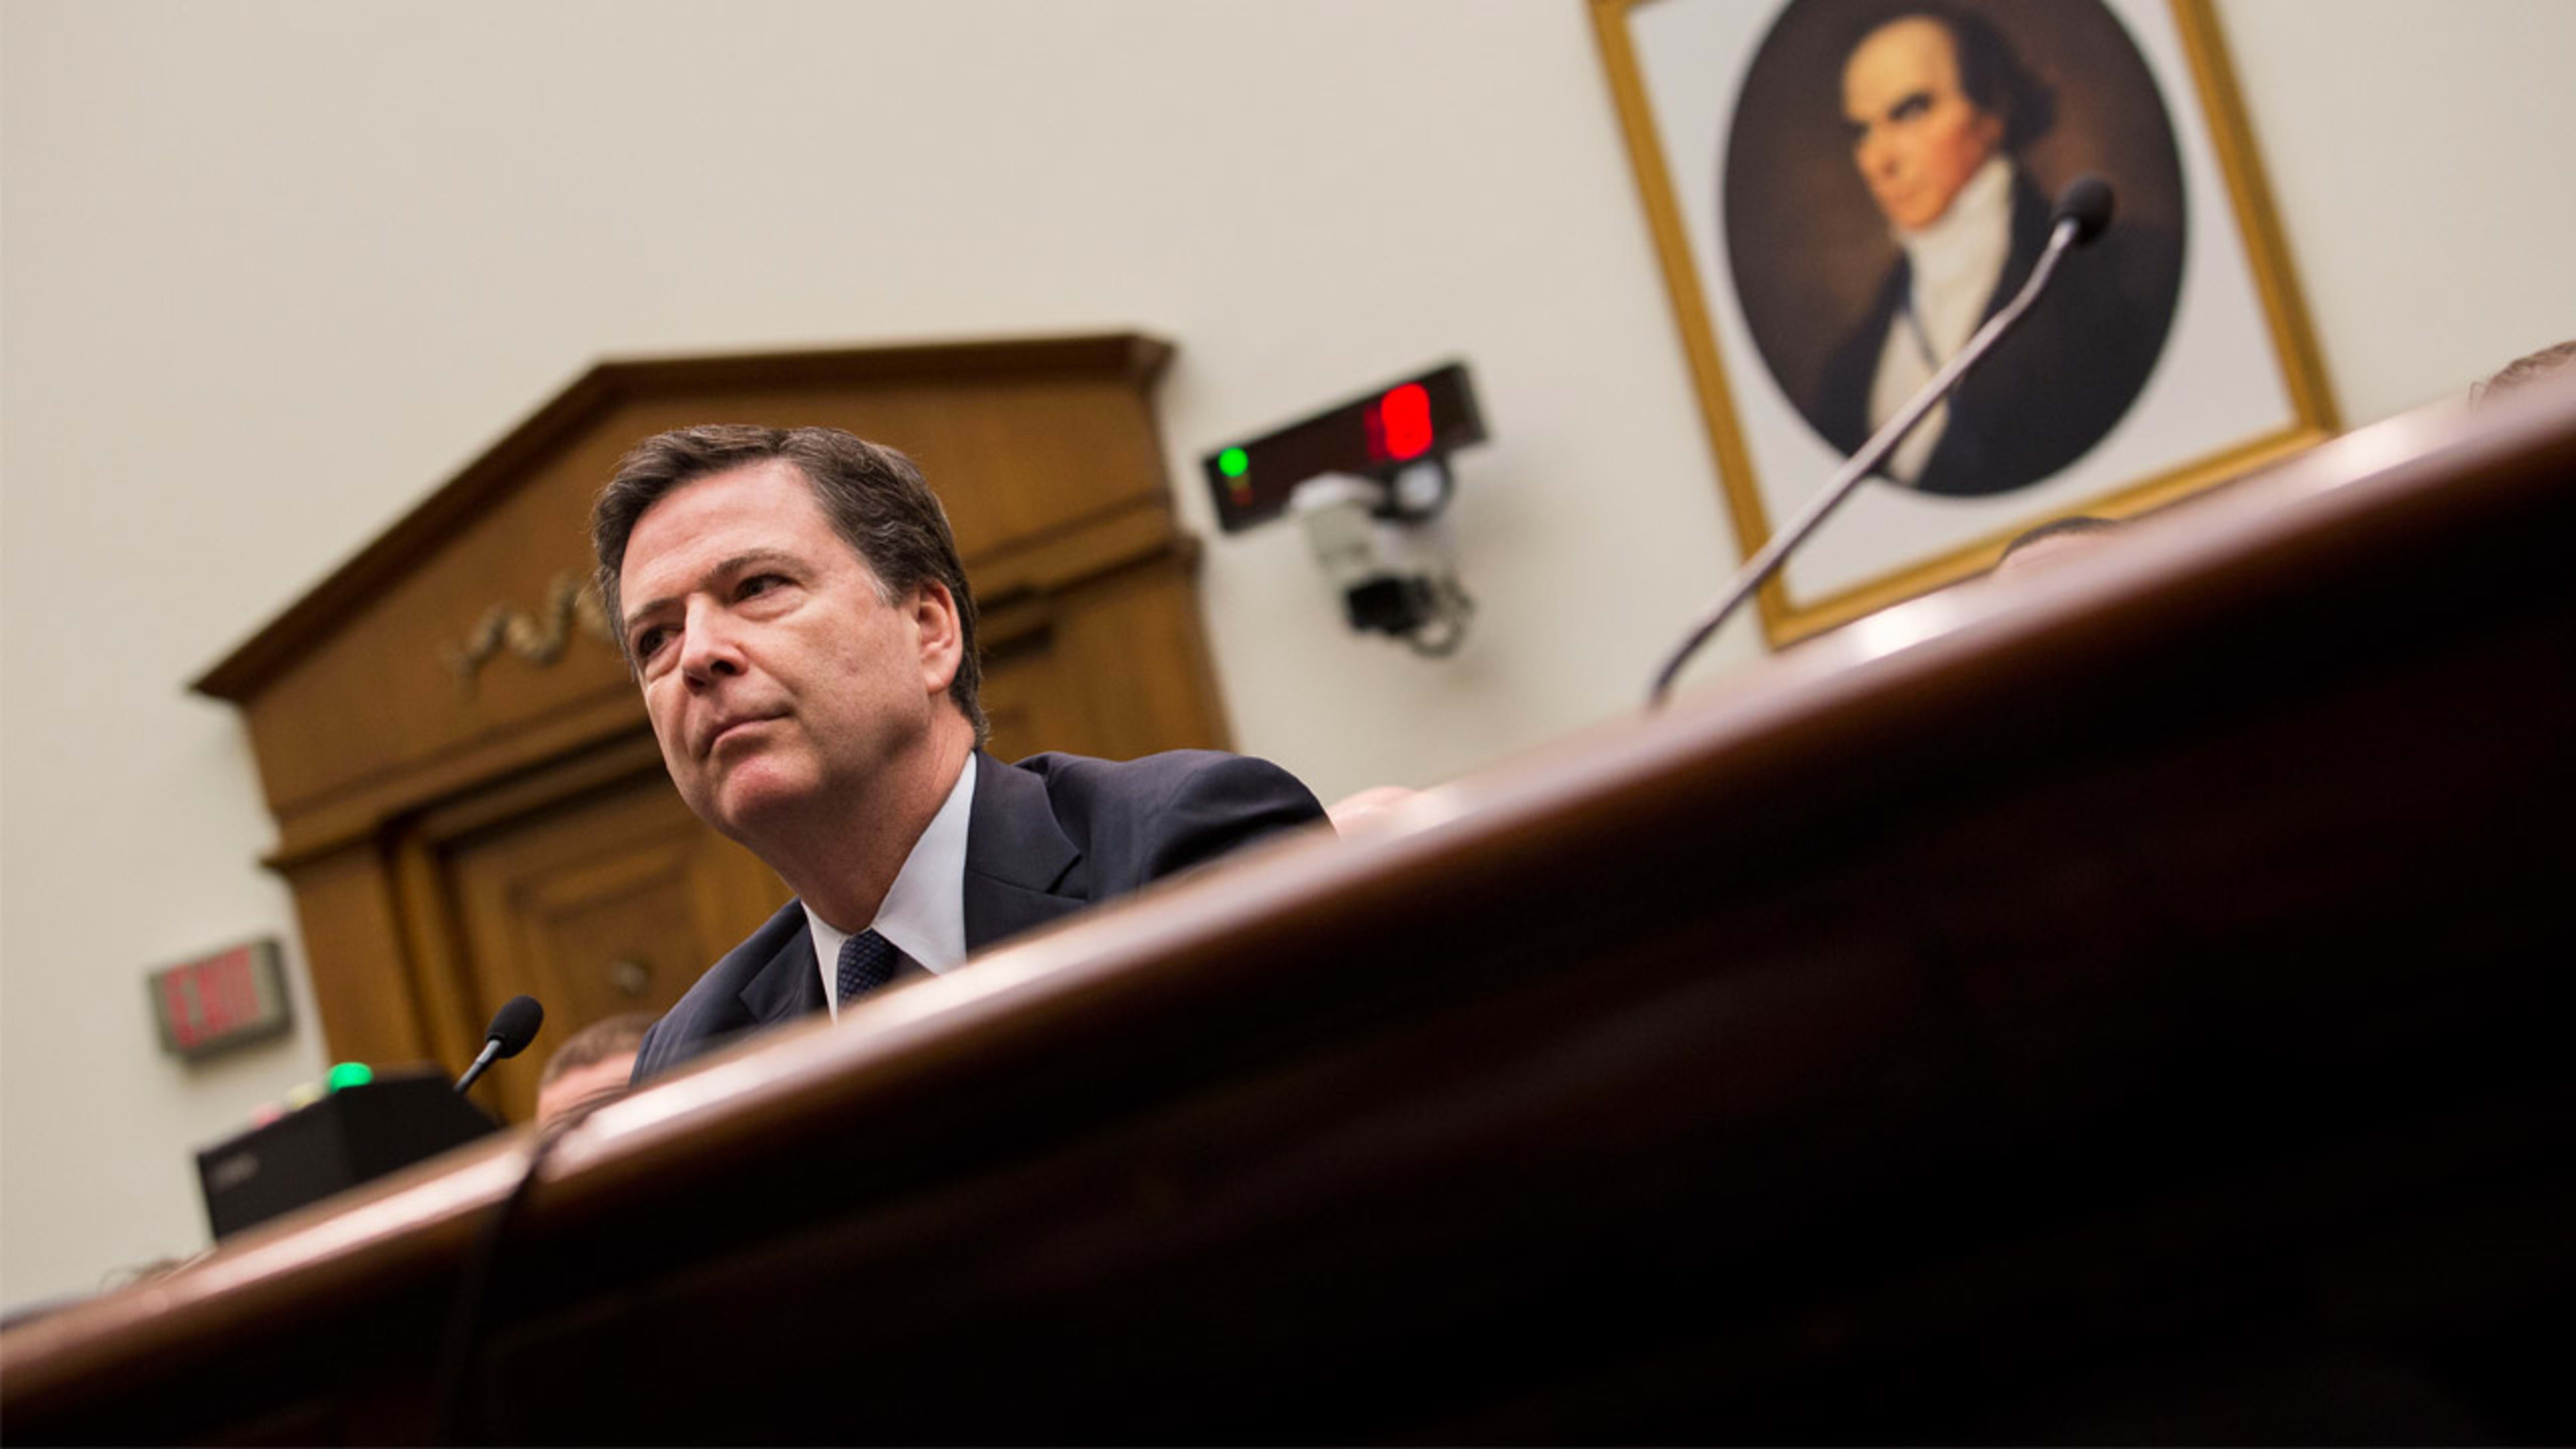 Source: Members Of Congress Dismayed By FBI Director’s Lack Of Tech Knowledge